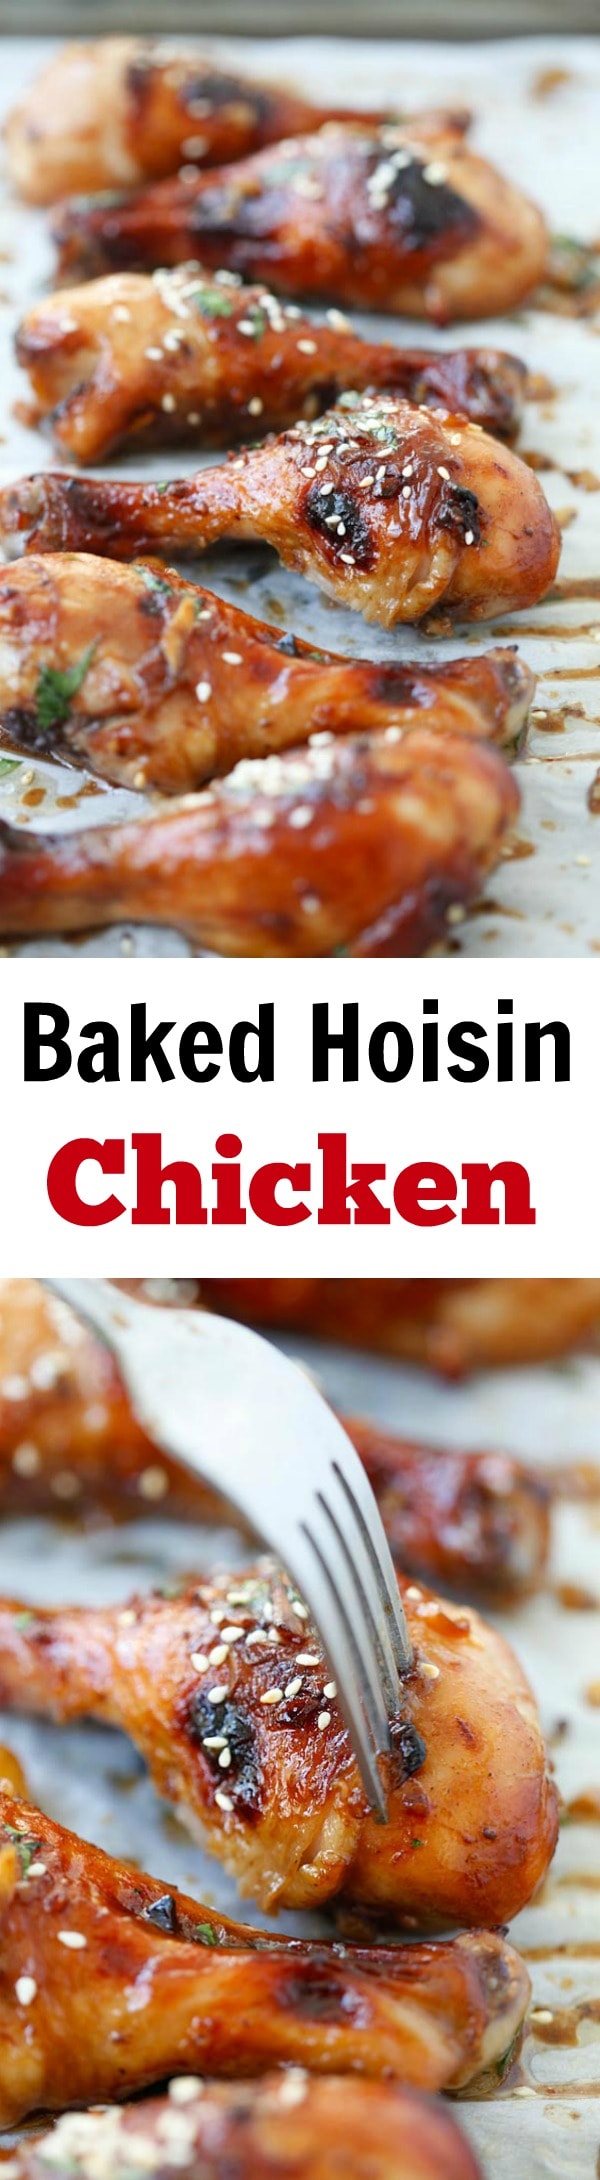 Baked Hoisin Chicken – moist, juicy and delicious chicken marinated with Hoisin sauce. Easy recipe that anyone can make at home | rasamalaysia.com